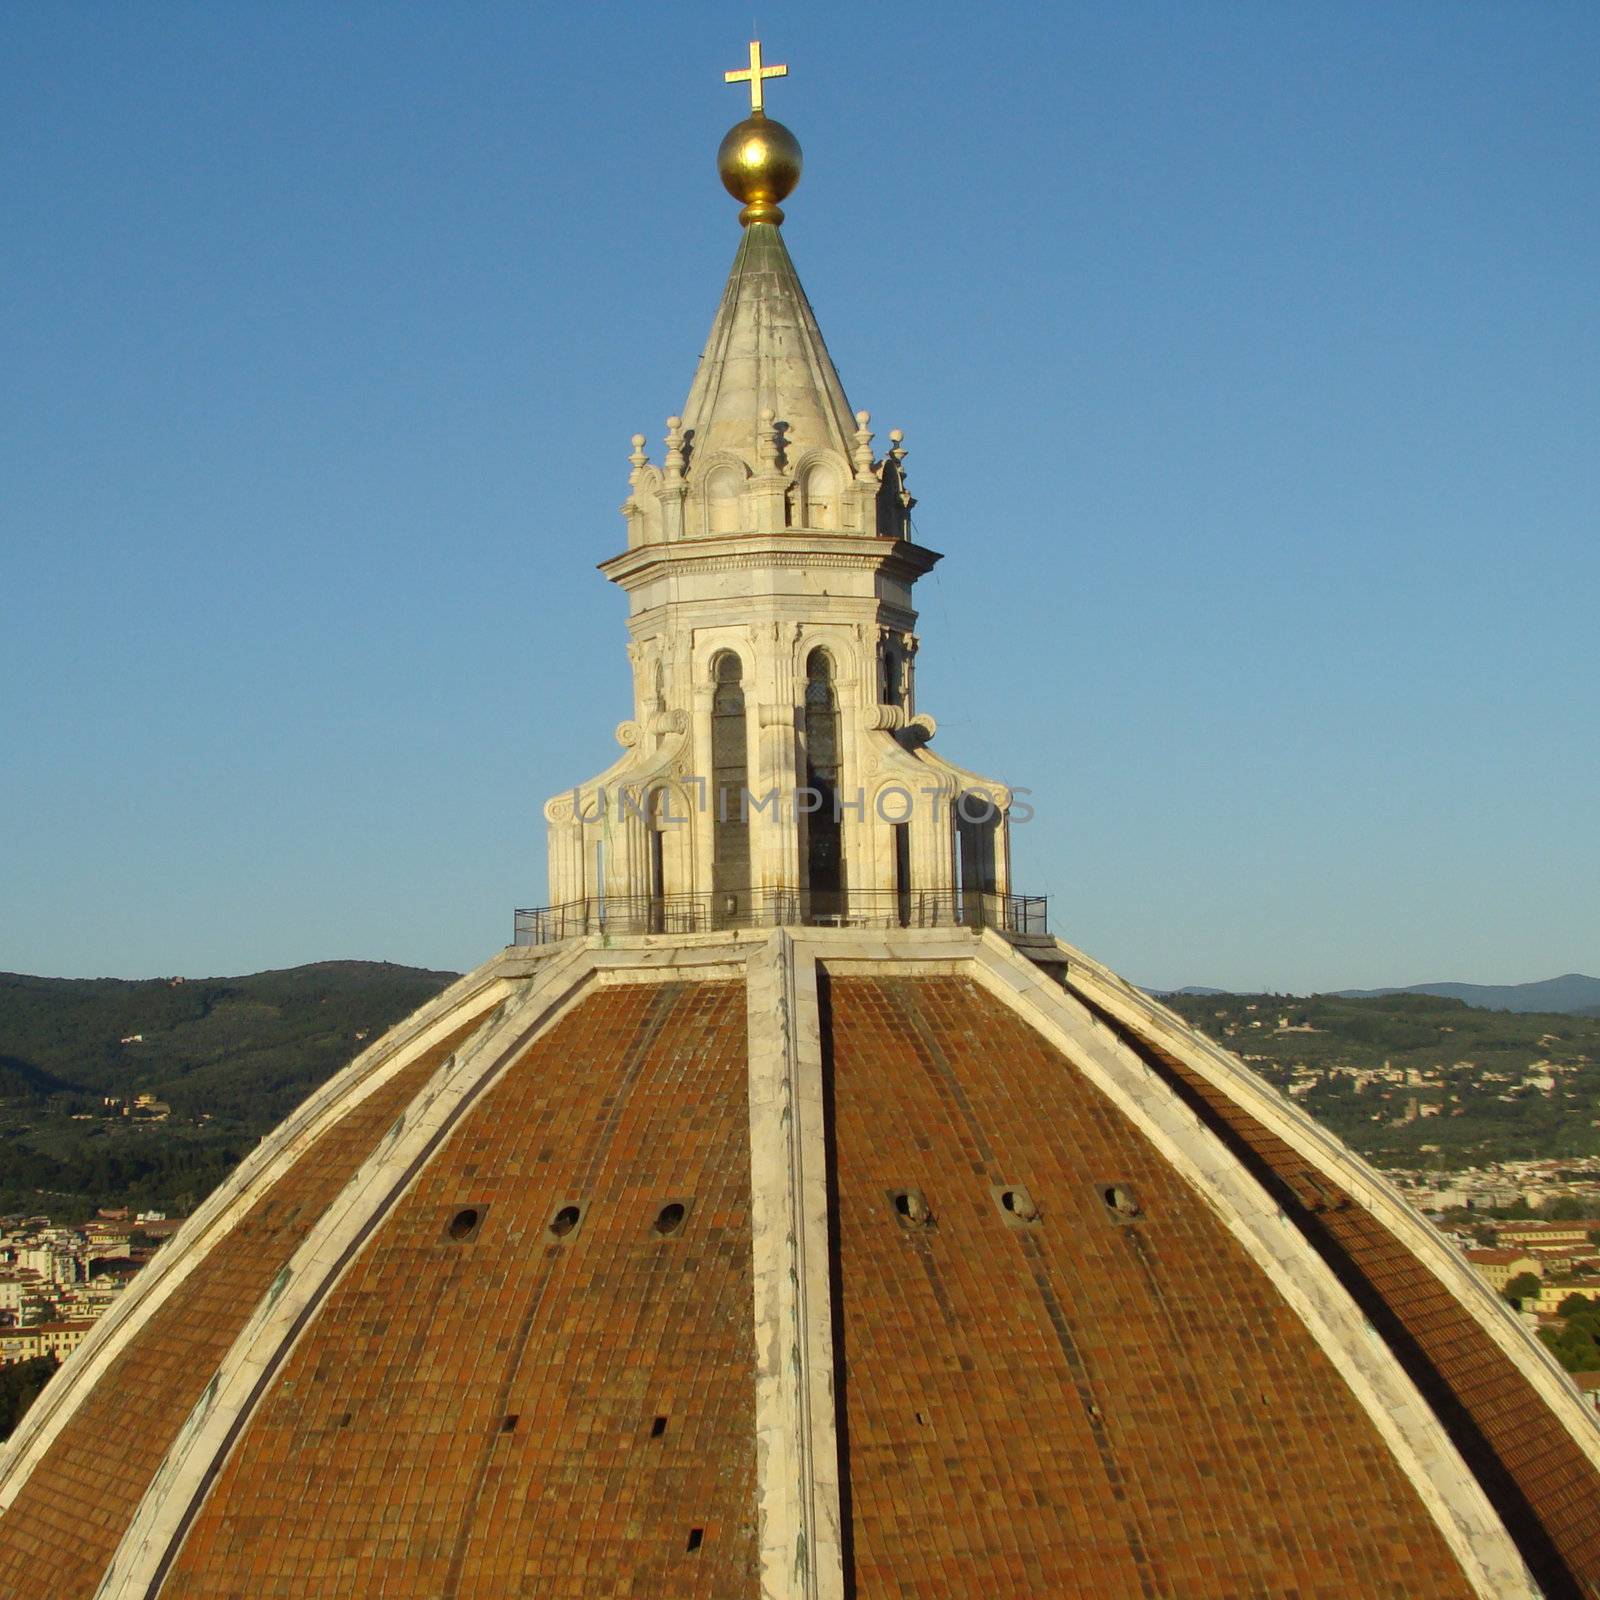 dome of Santa Maria del Fiore cathedral of Florencemasterpiece of Brunelleschi. Firenze - Tuscany, Italy.